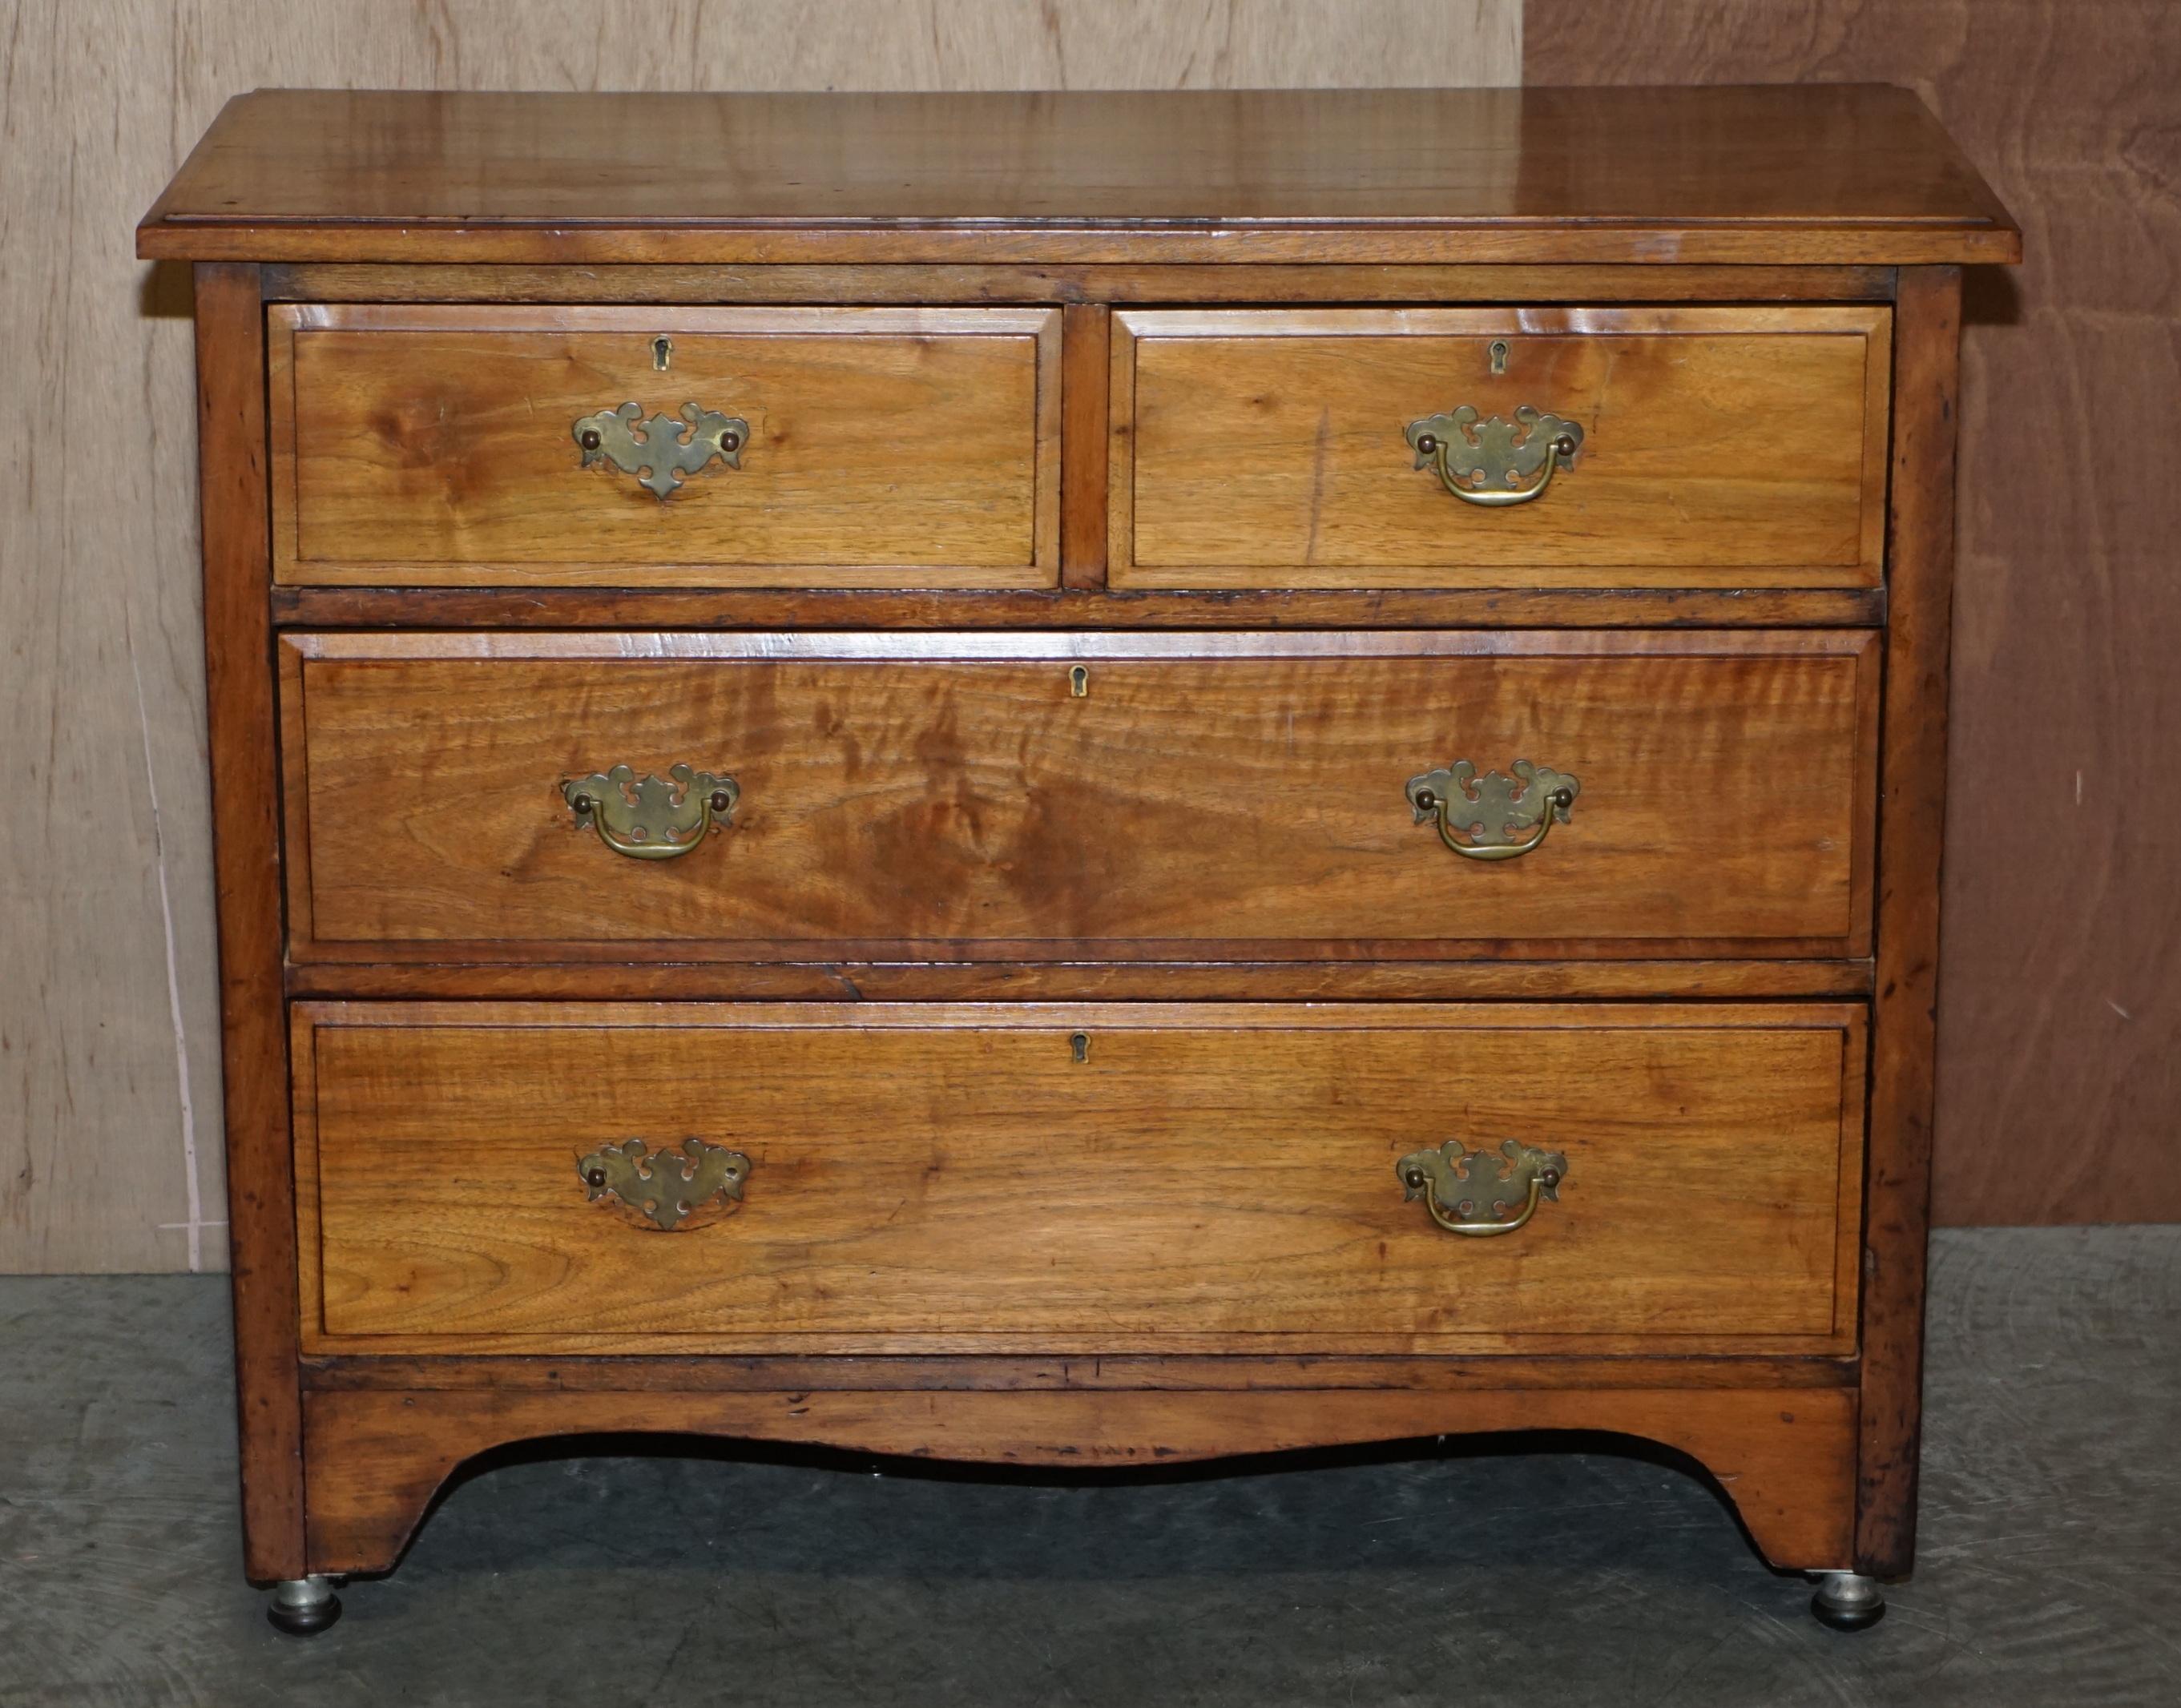 We are delighted to offer for sale this lovely Victorian golden mahogany two over two formation chest of drawers with wheels

A very well made and decorative piece, it’s a nice size and can be used in a Livingroom or bedroom setting. The timber